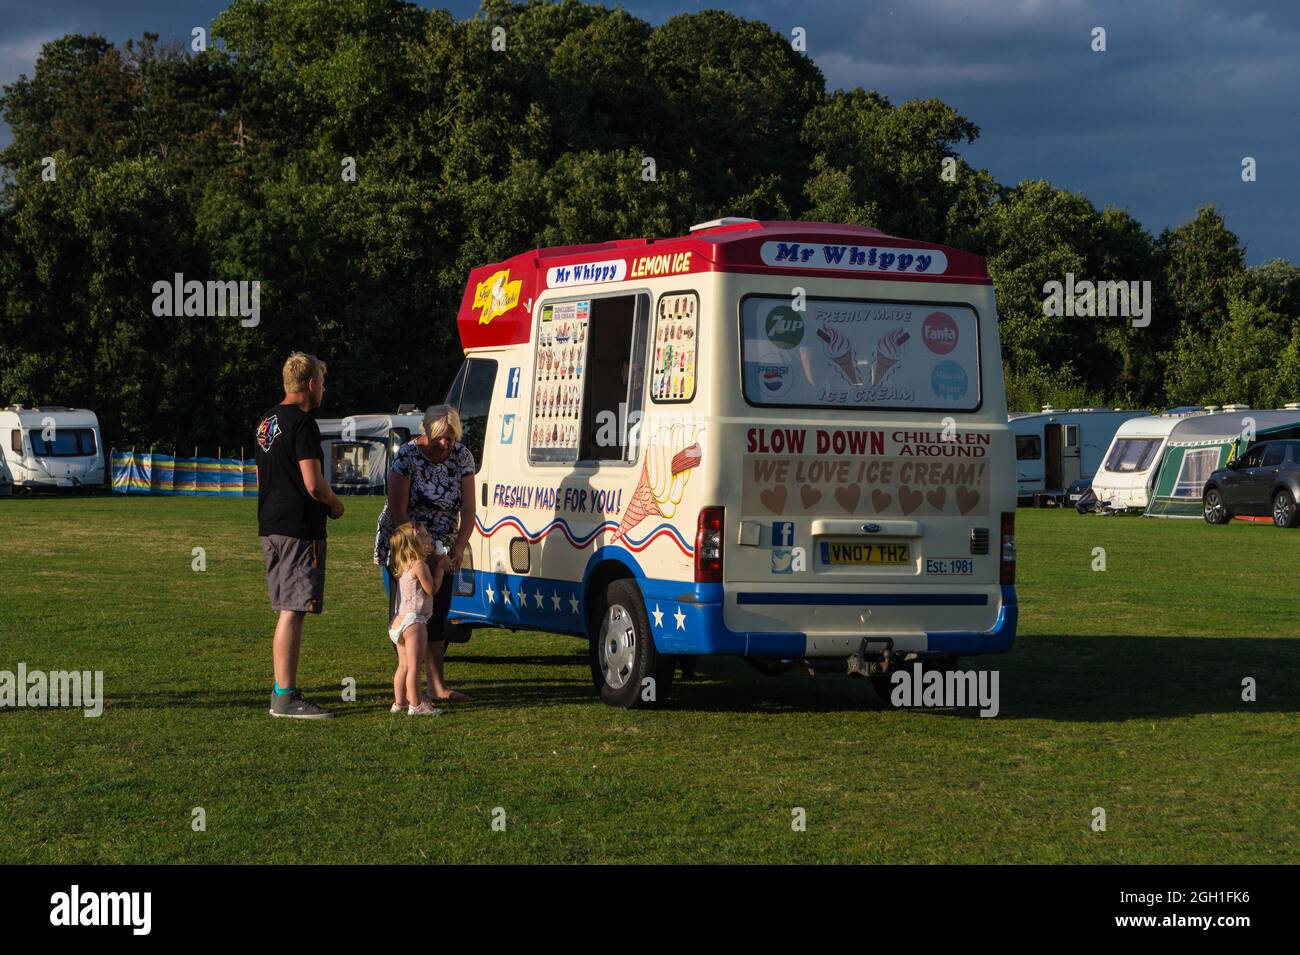 A young girl with adults at a 'Mr. Whippy' ice cream van, Applefields campsite, Leiston, Suffolk, England Stock Photo